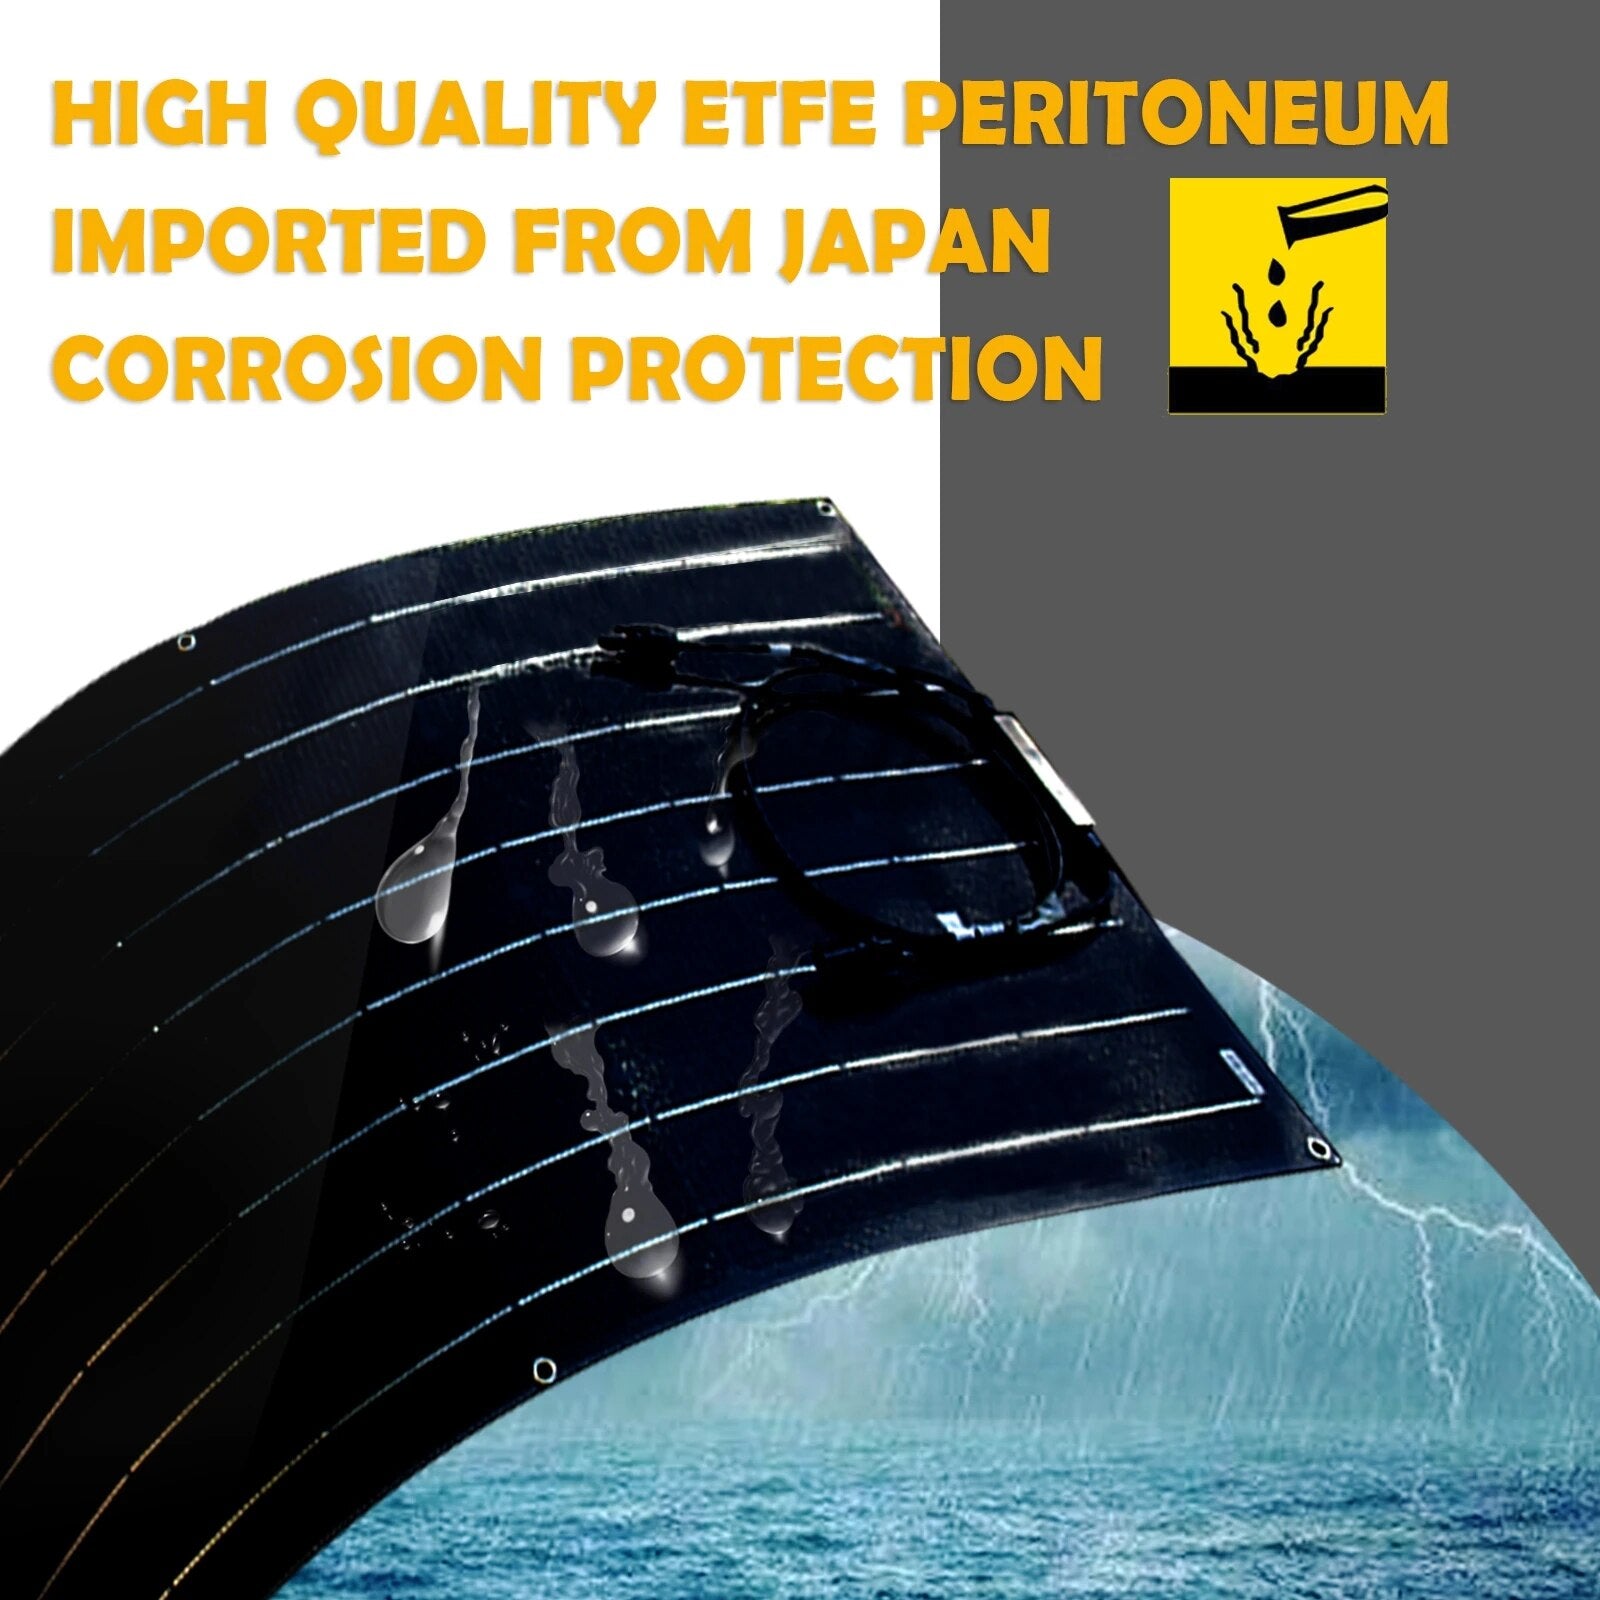 ETFE PERITONEUM IMPORTED FROM JAP